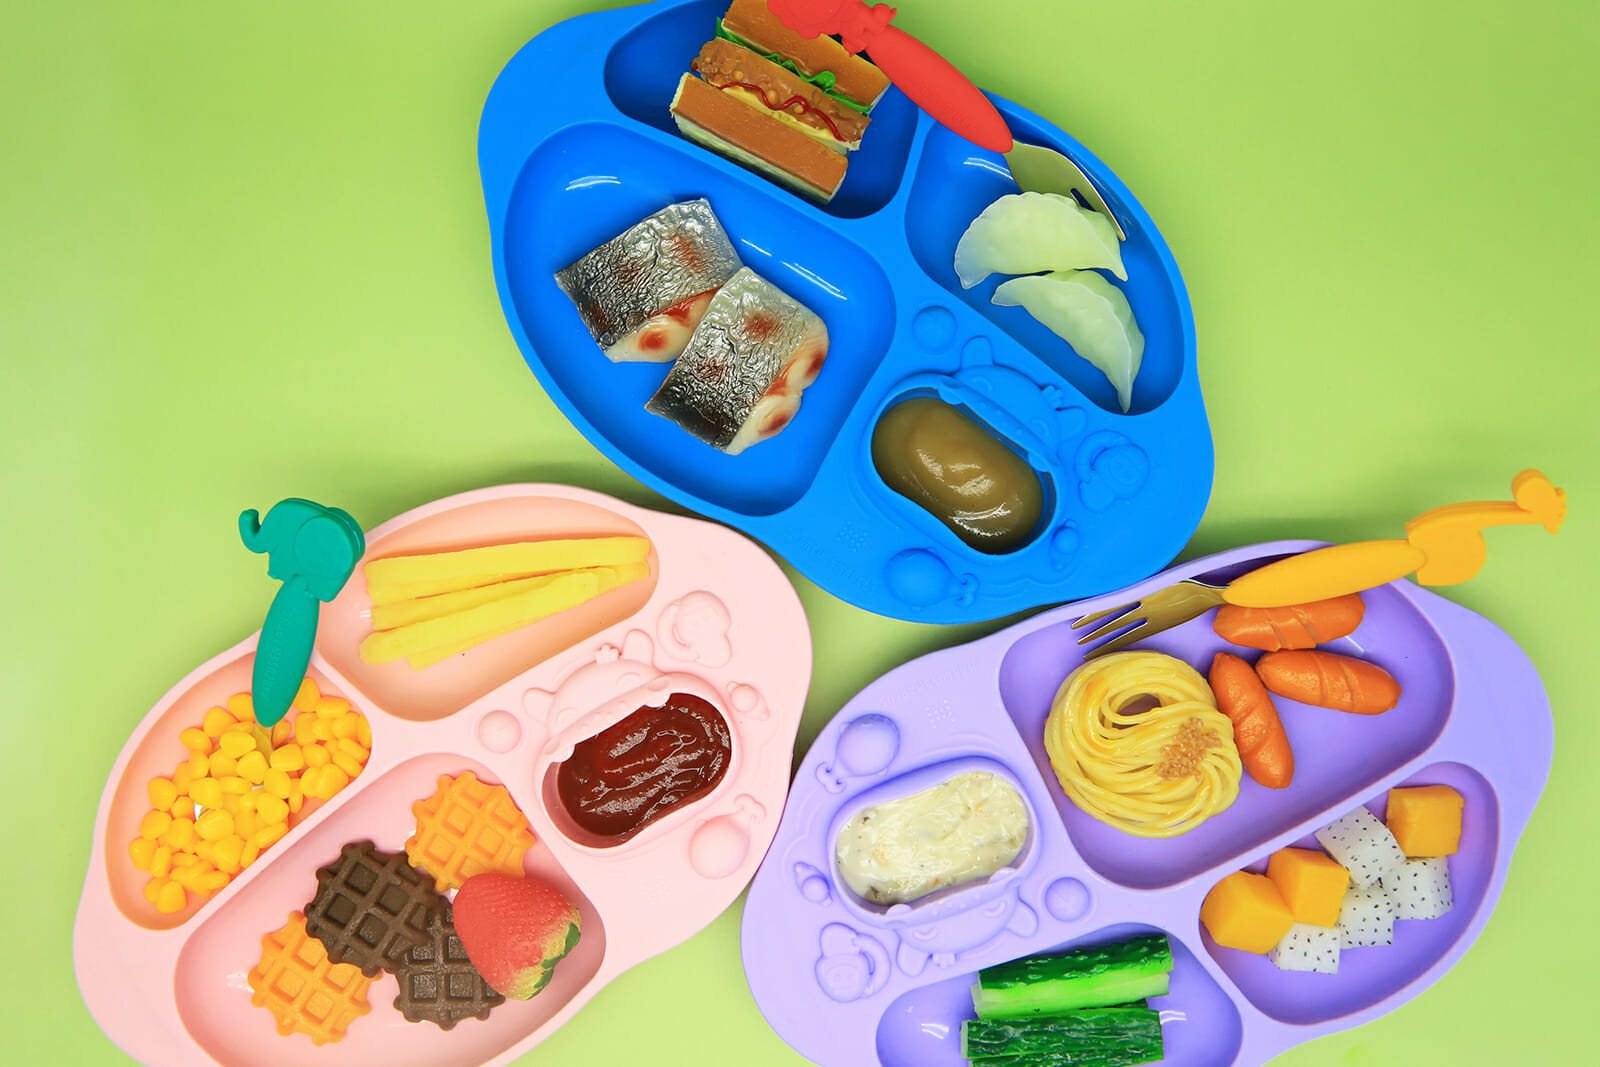 Marcus Marcus Yummy Dips Suction Divided Plate has a unique colors and designs perfect for young kids.